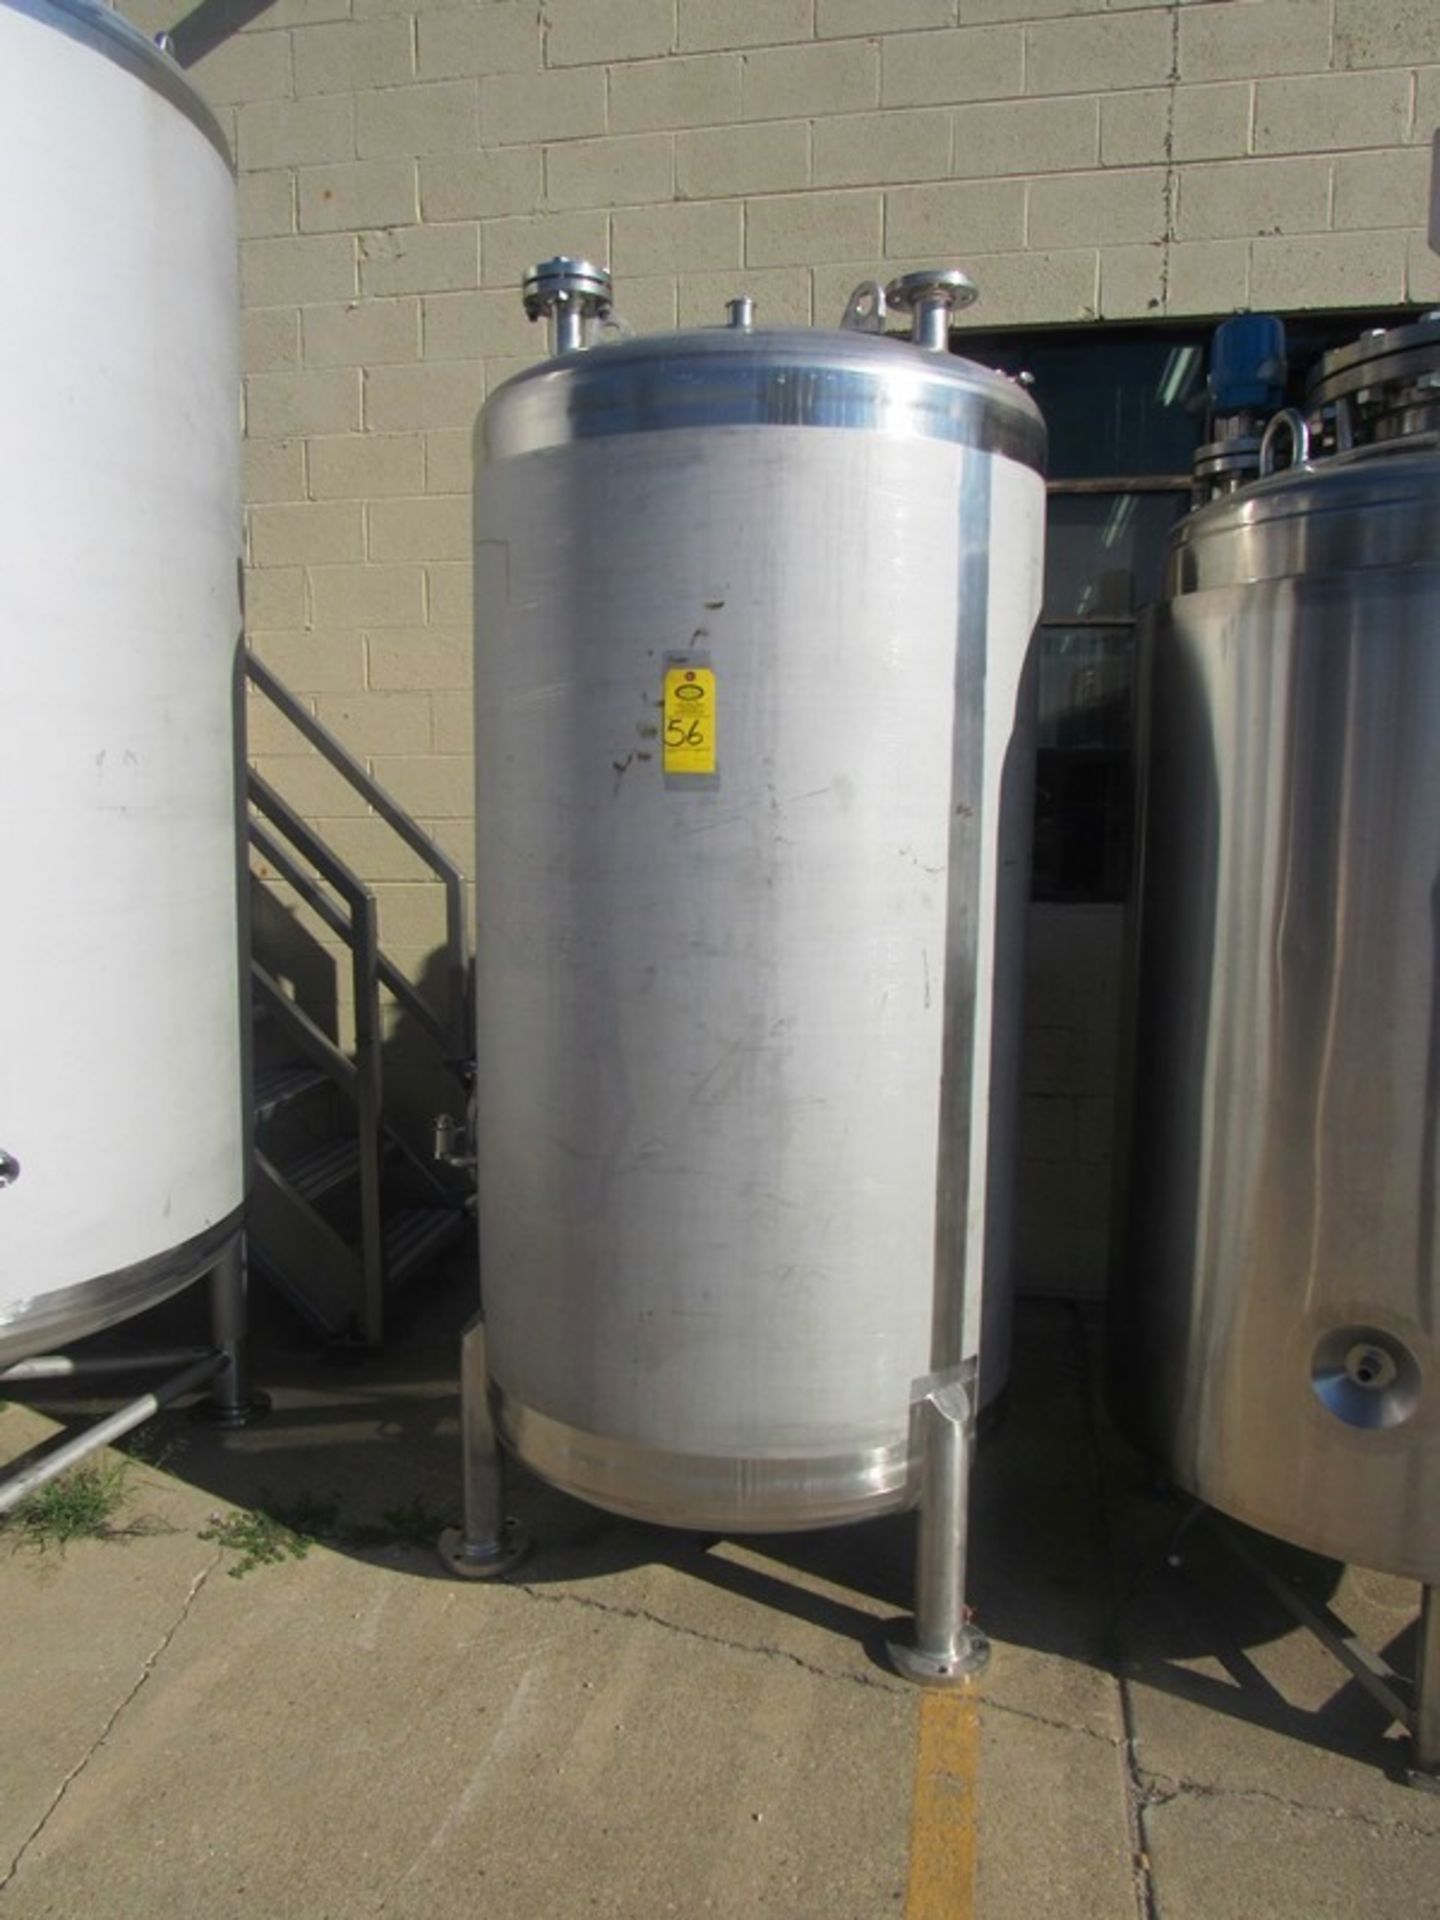 Lee Industries Mdl. 450DBT Stainless Steel Single Wall Tank, 450 gallon capacity, approximate 4'